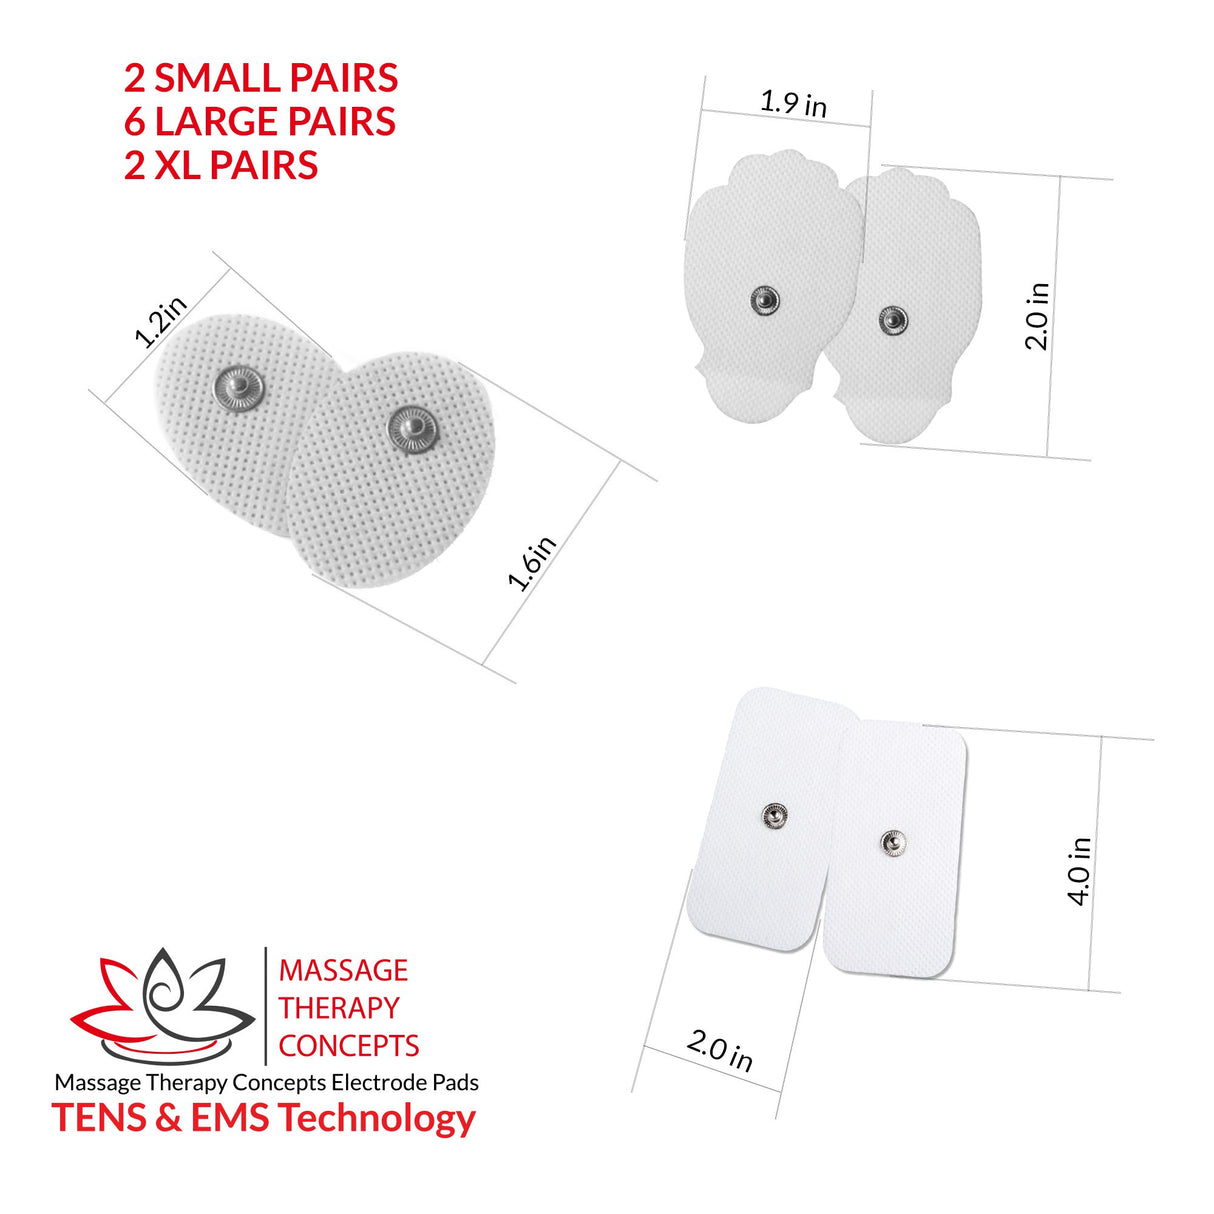 TENS Unit Pads - Premium Quality Snap Replacement Electrodes for TENS and EMS Electrotherapy - Self Adhesive Reusable Patches up to 30 Times (20 Pads) Combo (S, L, XL)